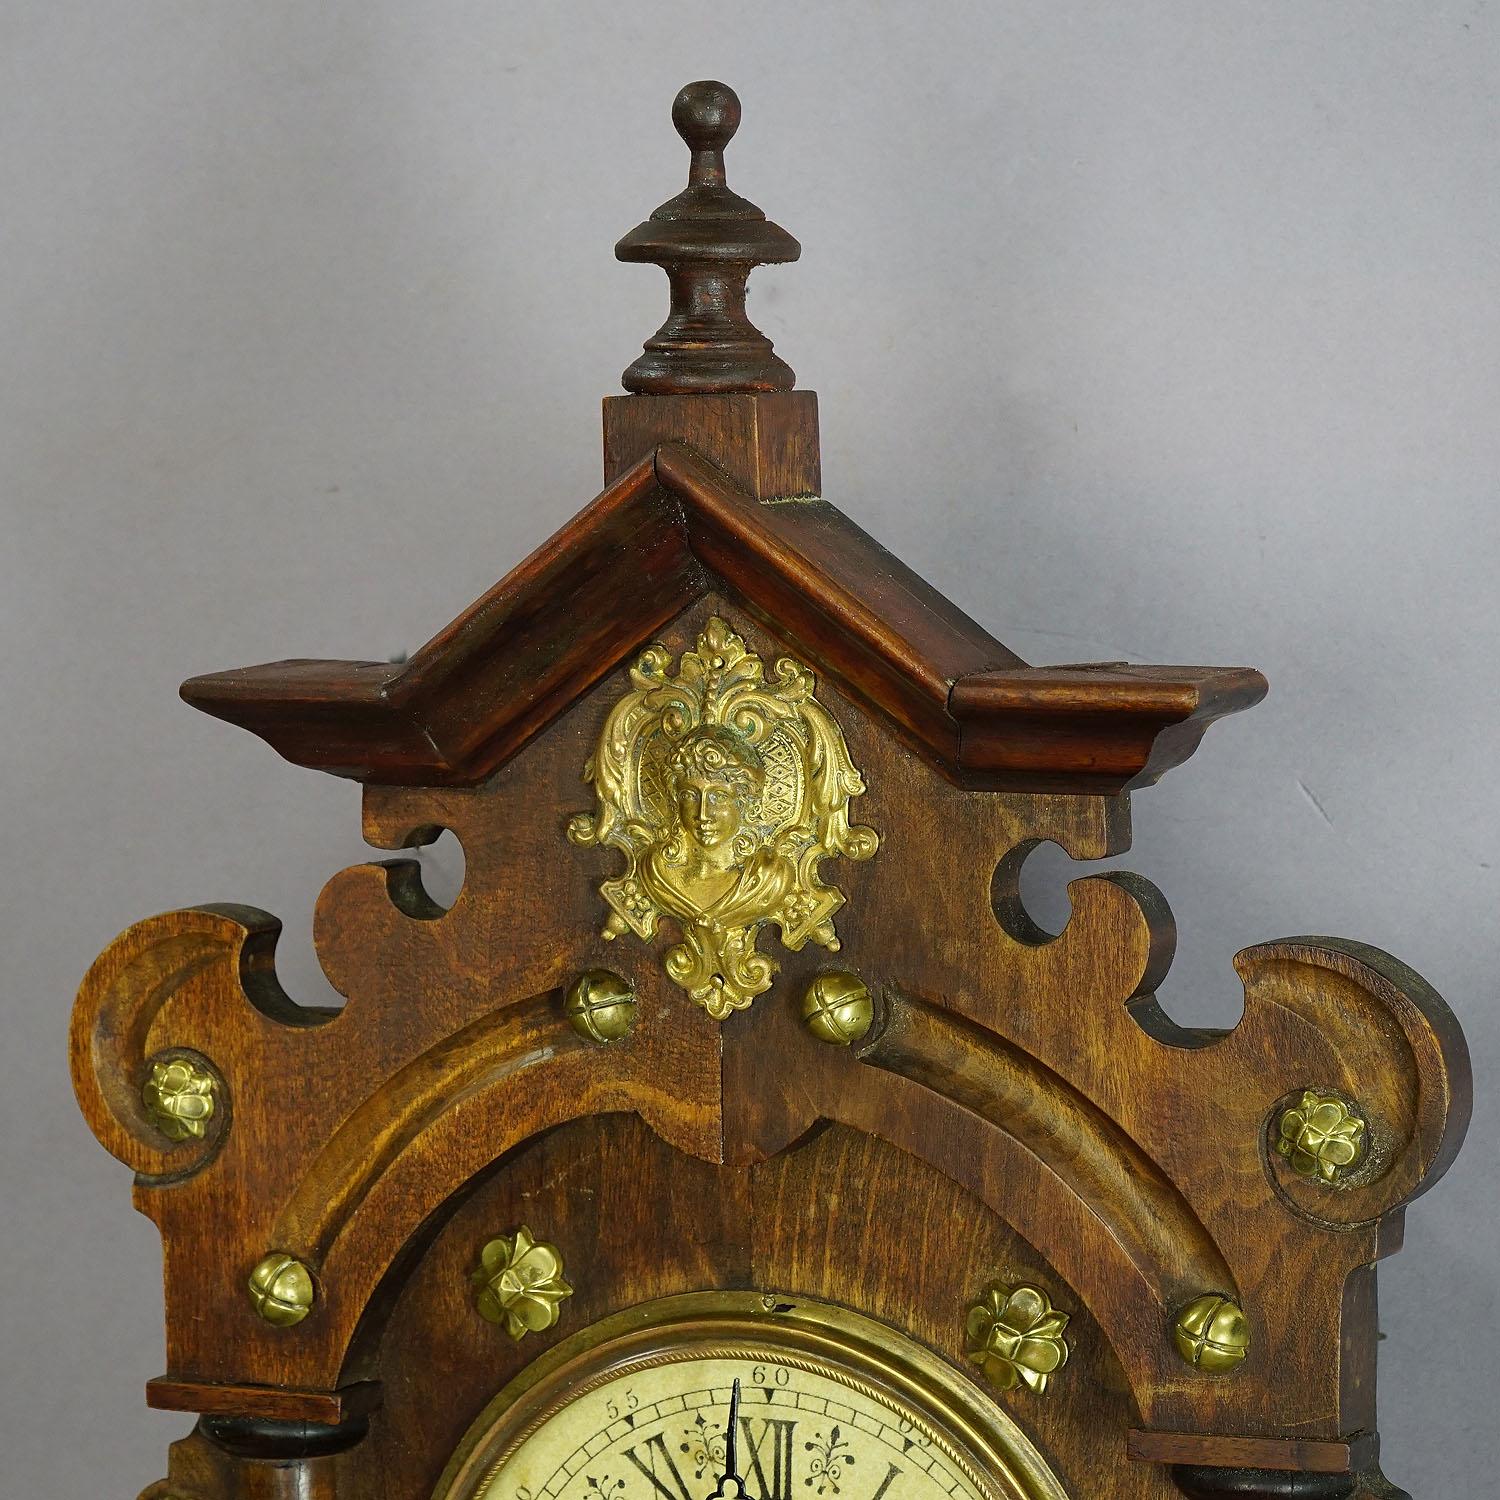 A lovely hand carved wooden wall clock decorated with several brass applications. Manufactured in Germany, circa 1920. Clockwork cleaned and overworked - in working order.

Measures: Width 9.25